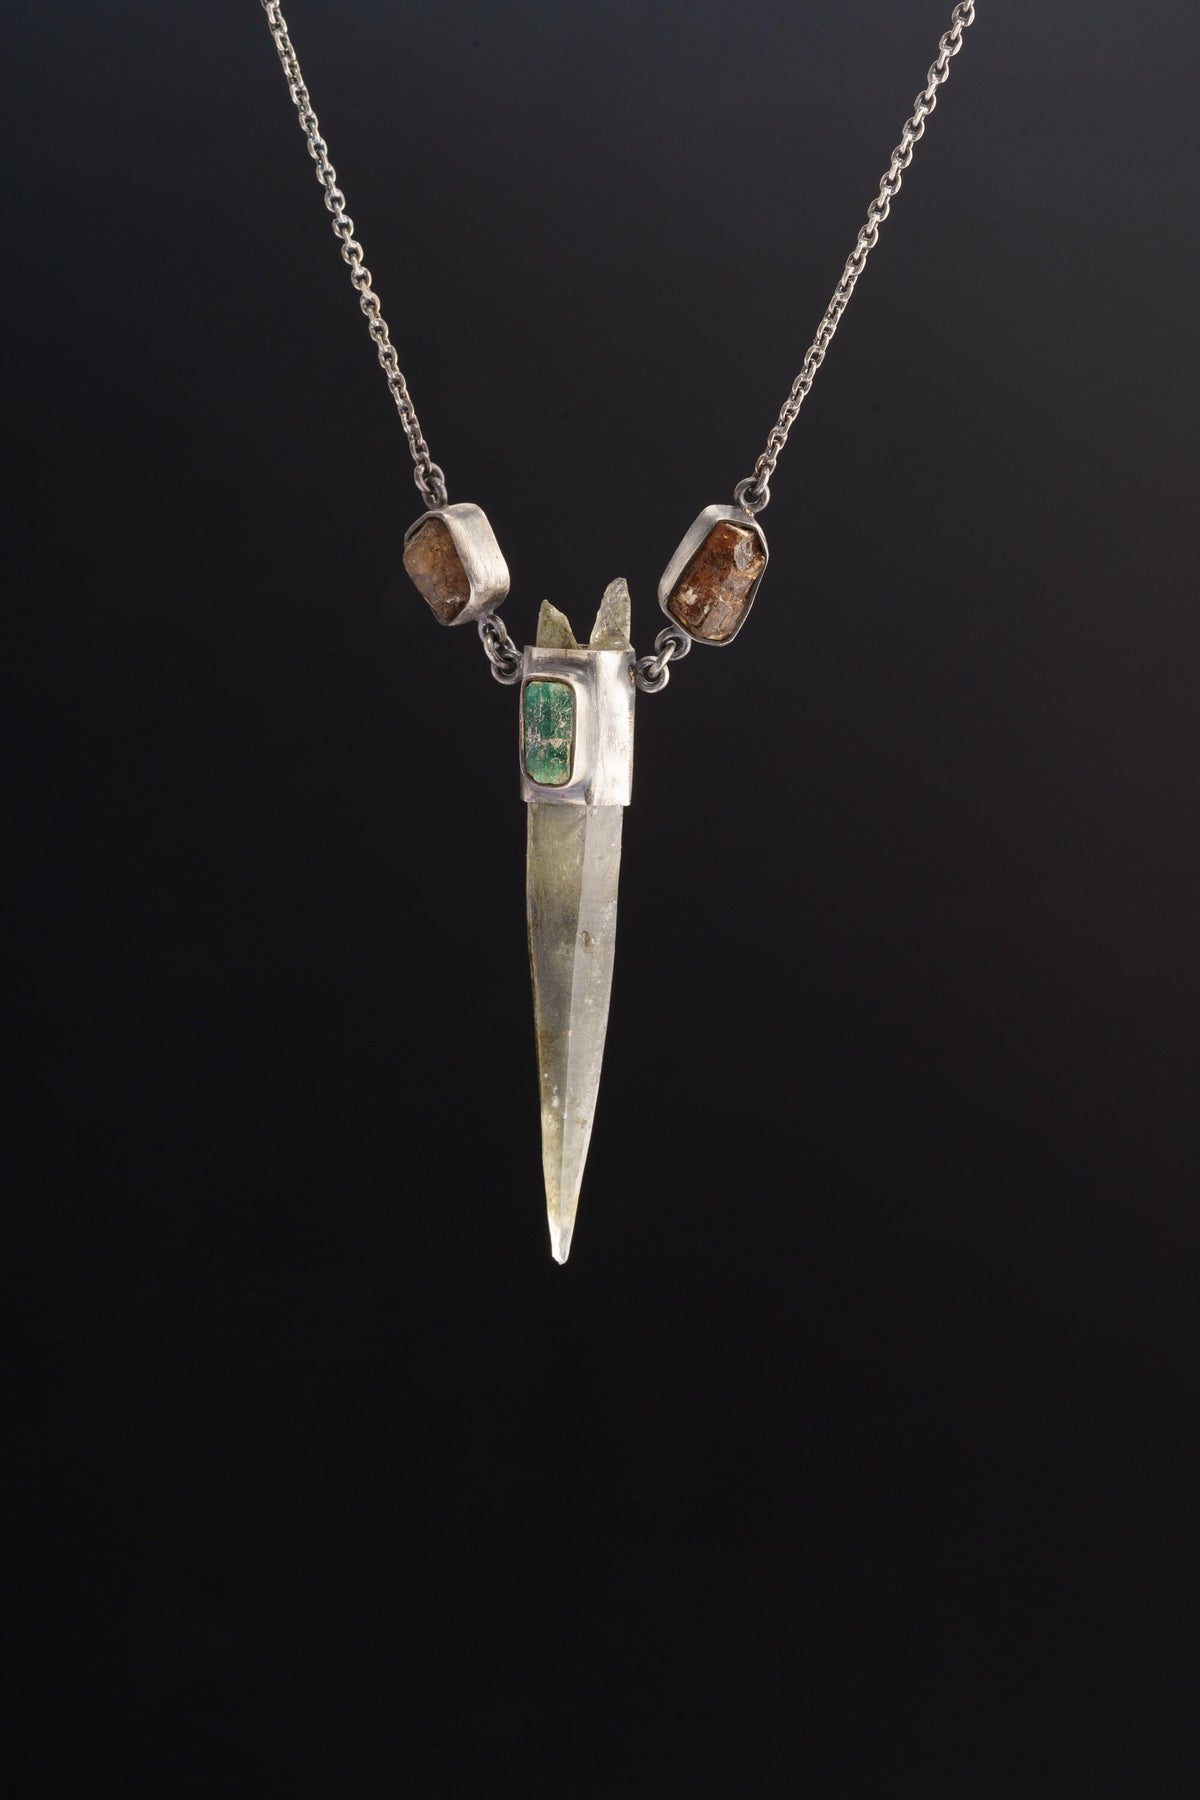 Emerald Matrix - Optical Clear Himalayan Inclusion Quartz with Australian Emerald and Dravite Tourmaline in Oxidized Sterling Silver Pendant